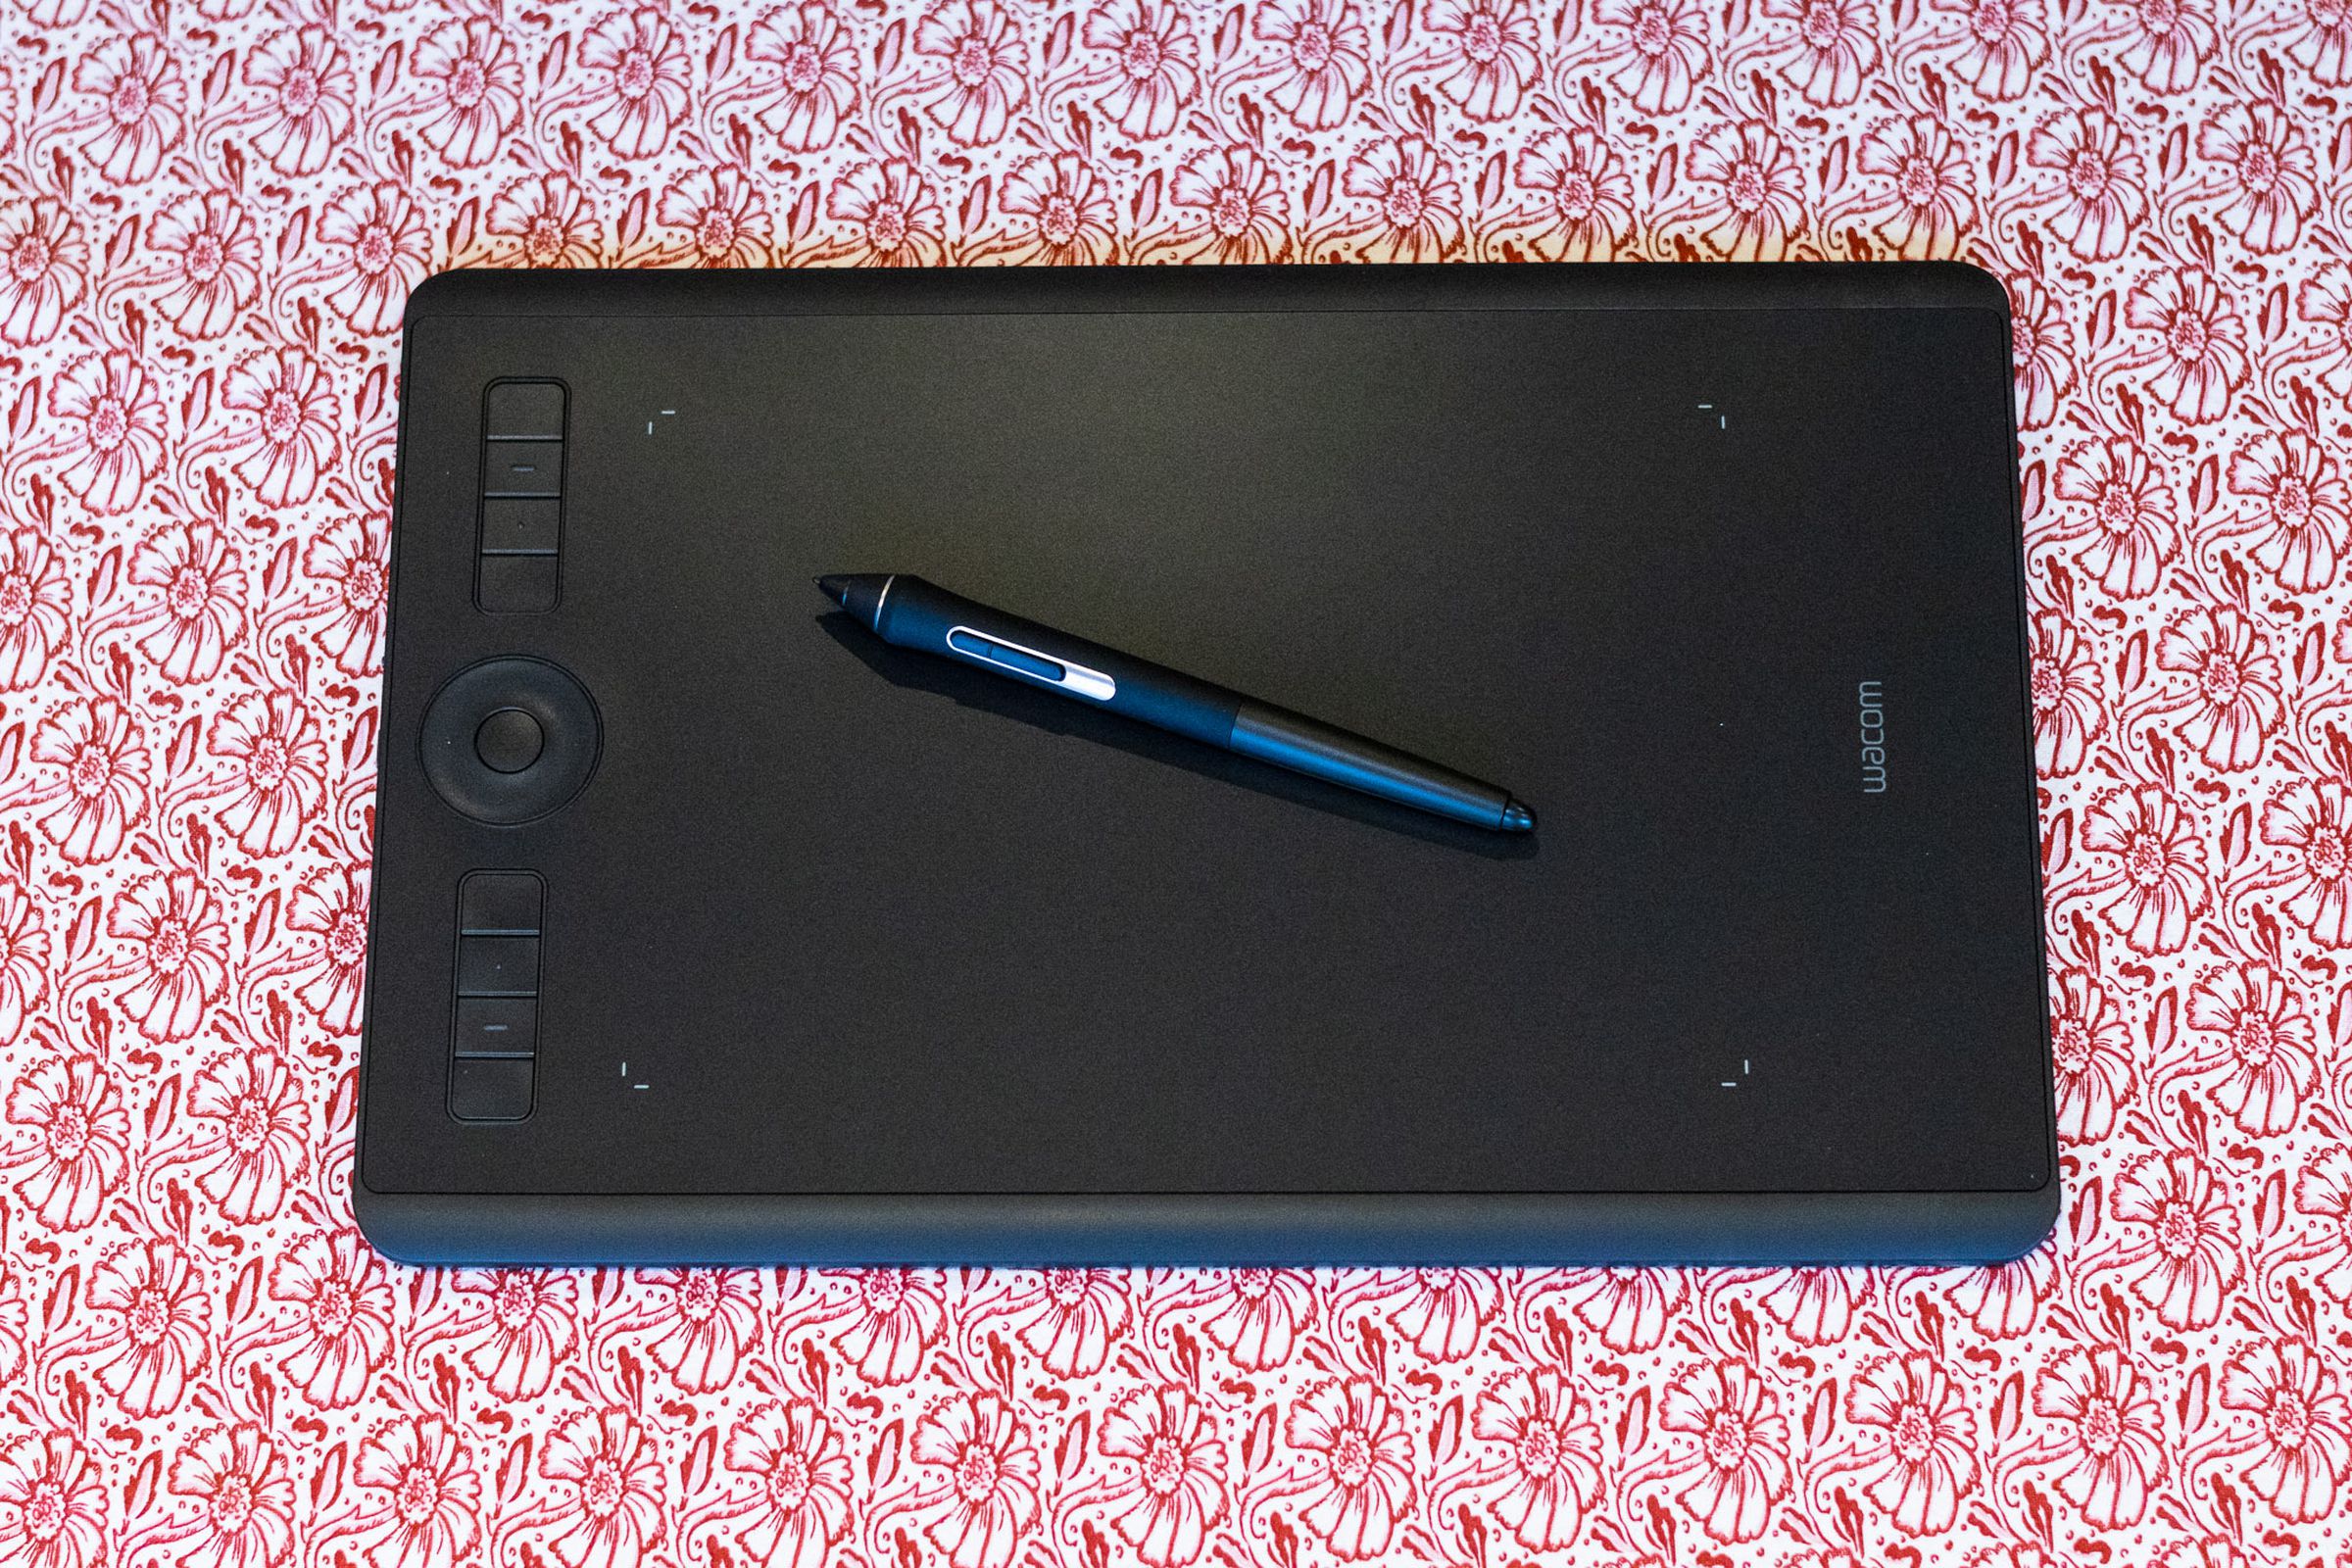 The Wacom Intuos Pro (Medium) resting against a table.